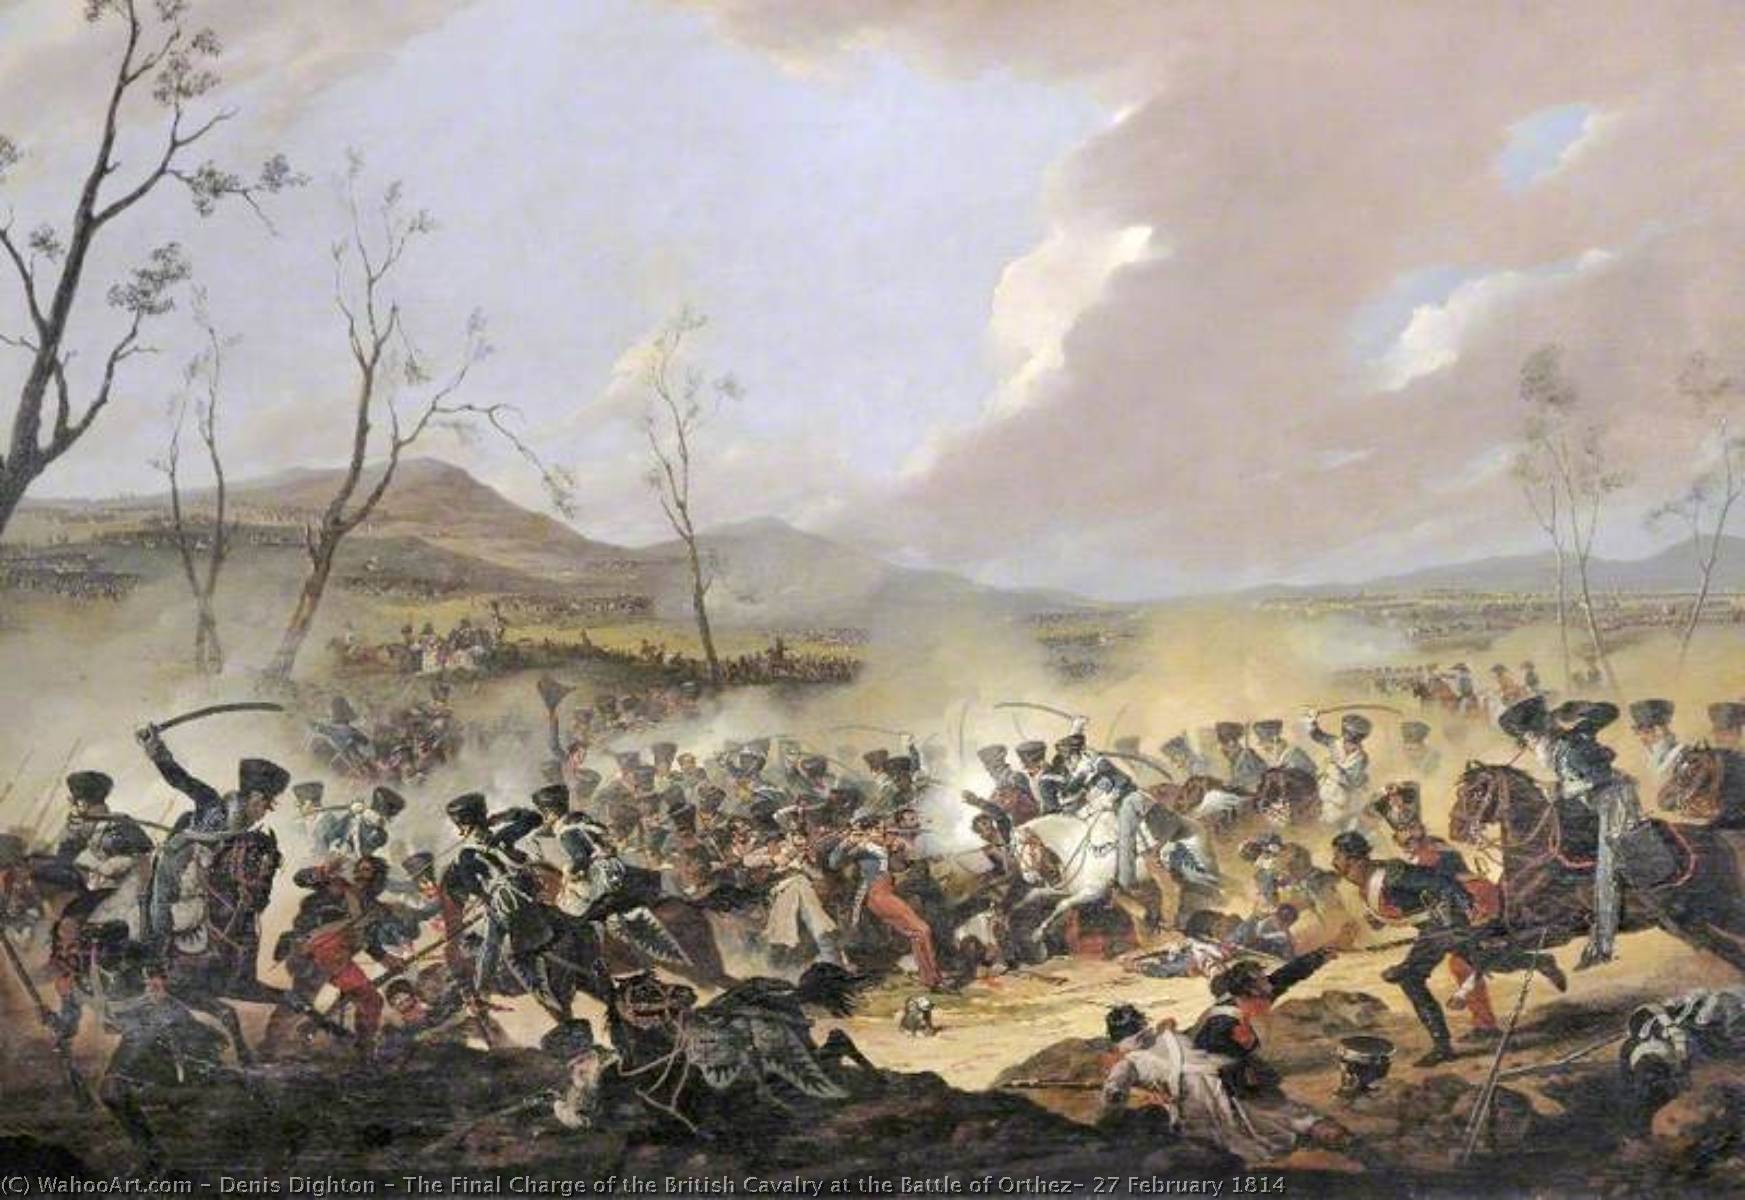 WikiOO.org - Güzel Sanatlar Ansiklopedisi - Resim, Resimler Denis Dighton - The Final Charge of the British Cavalry at the Battle of Orthez, 27 February 1814